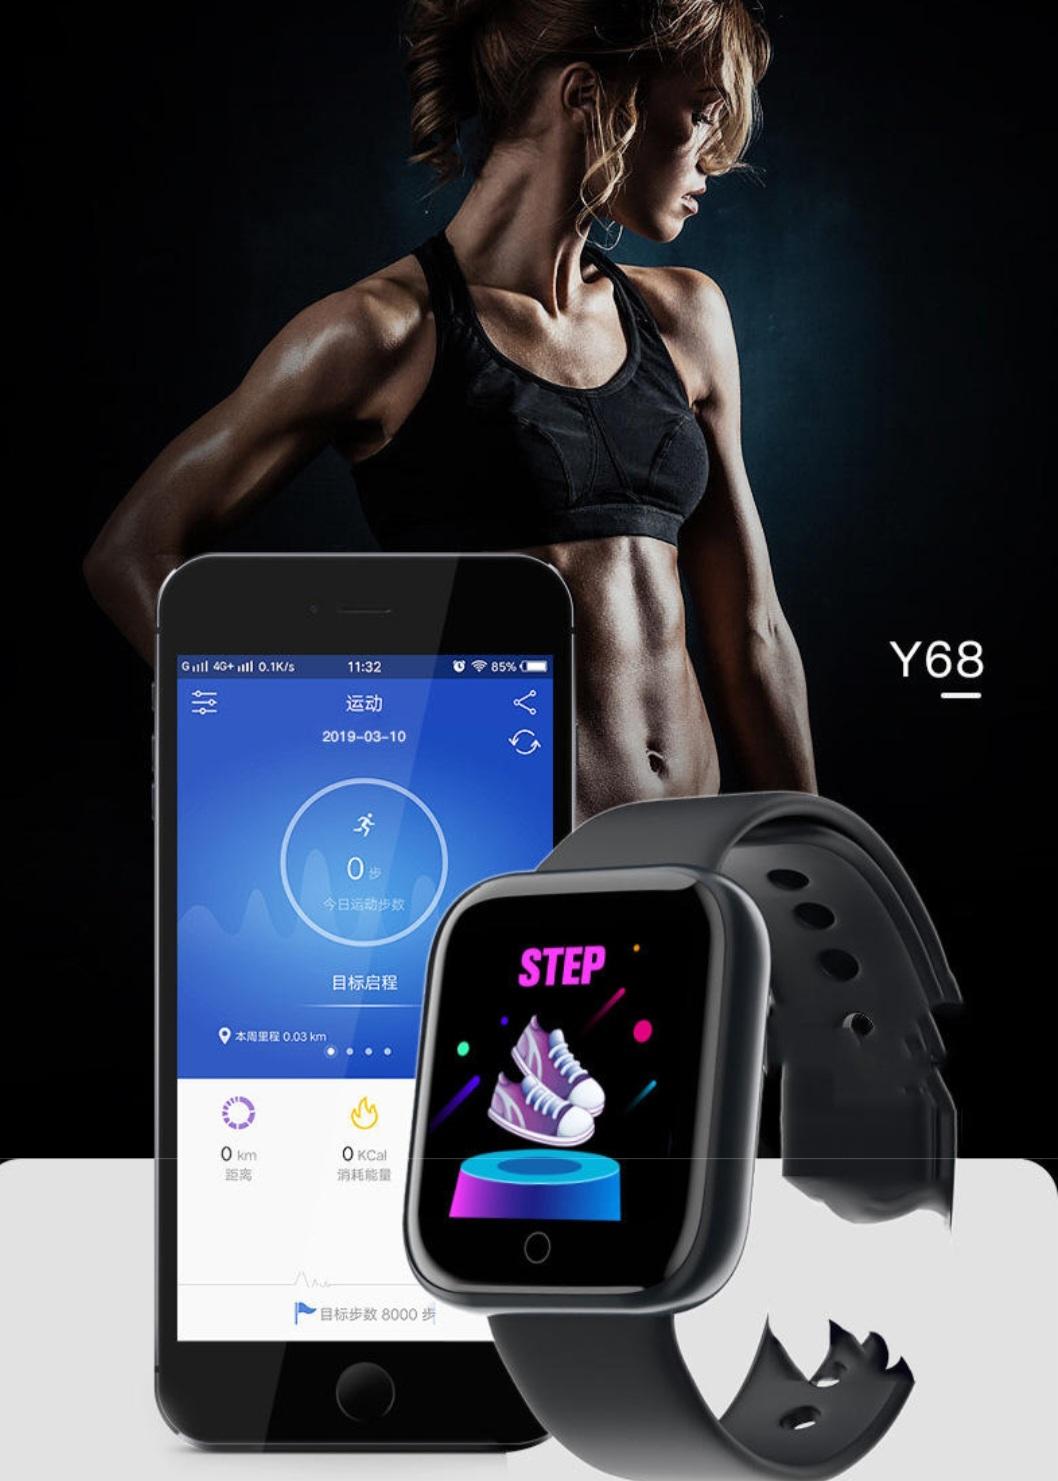 The D20 Smart Bracelet has a variety of built-in exercise modes, no need to add a mobile phone, you